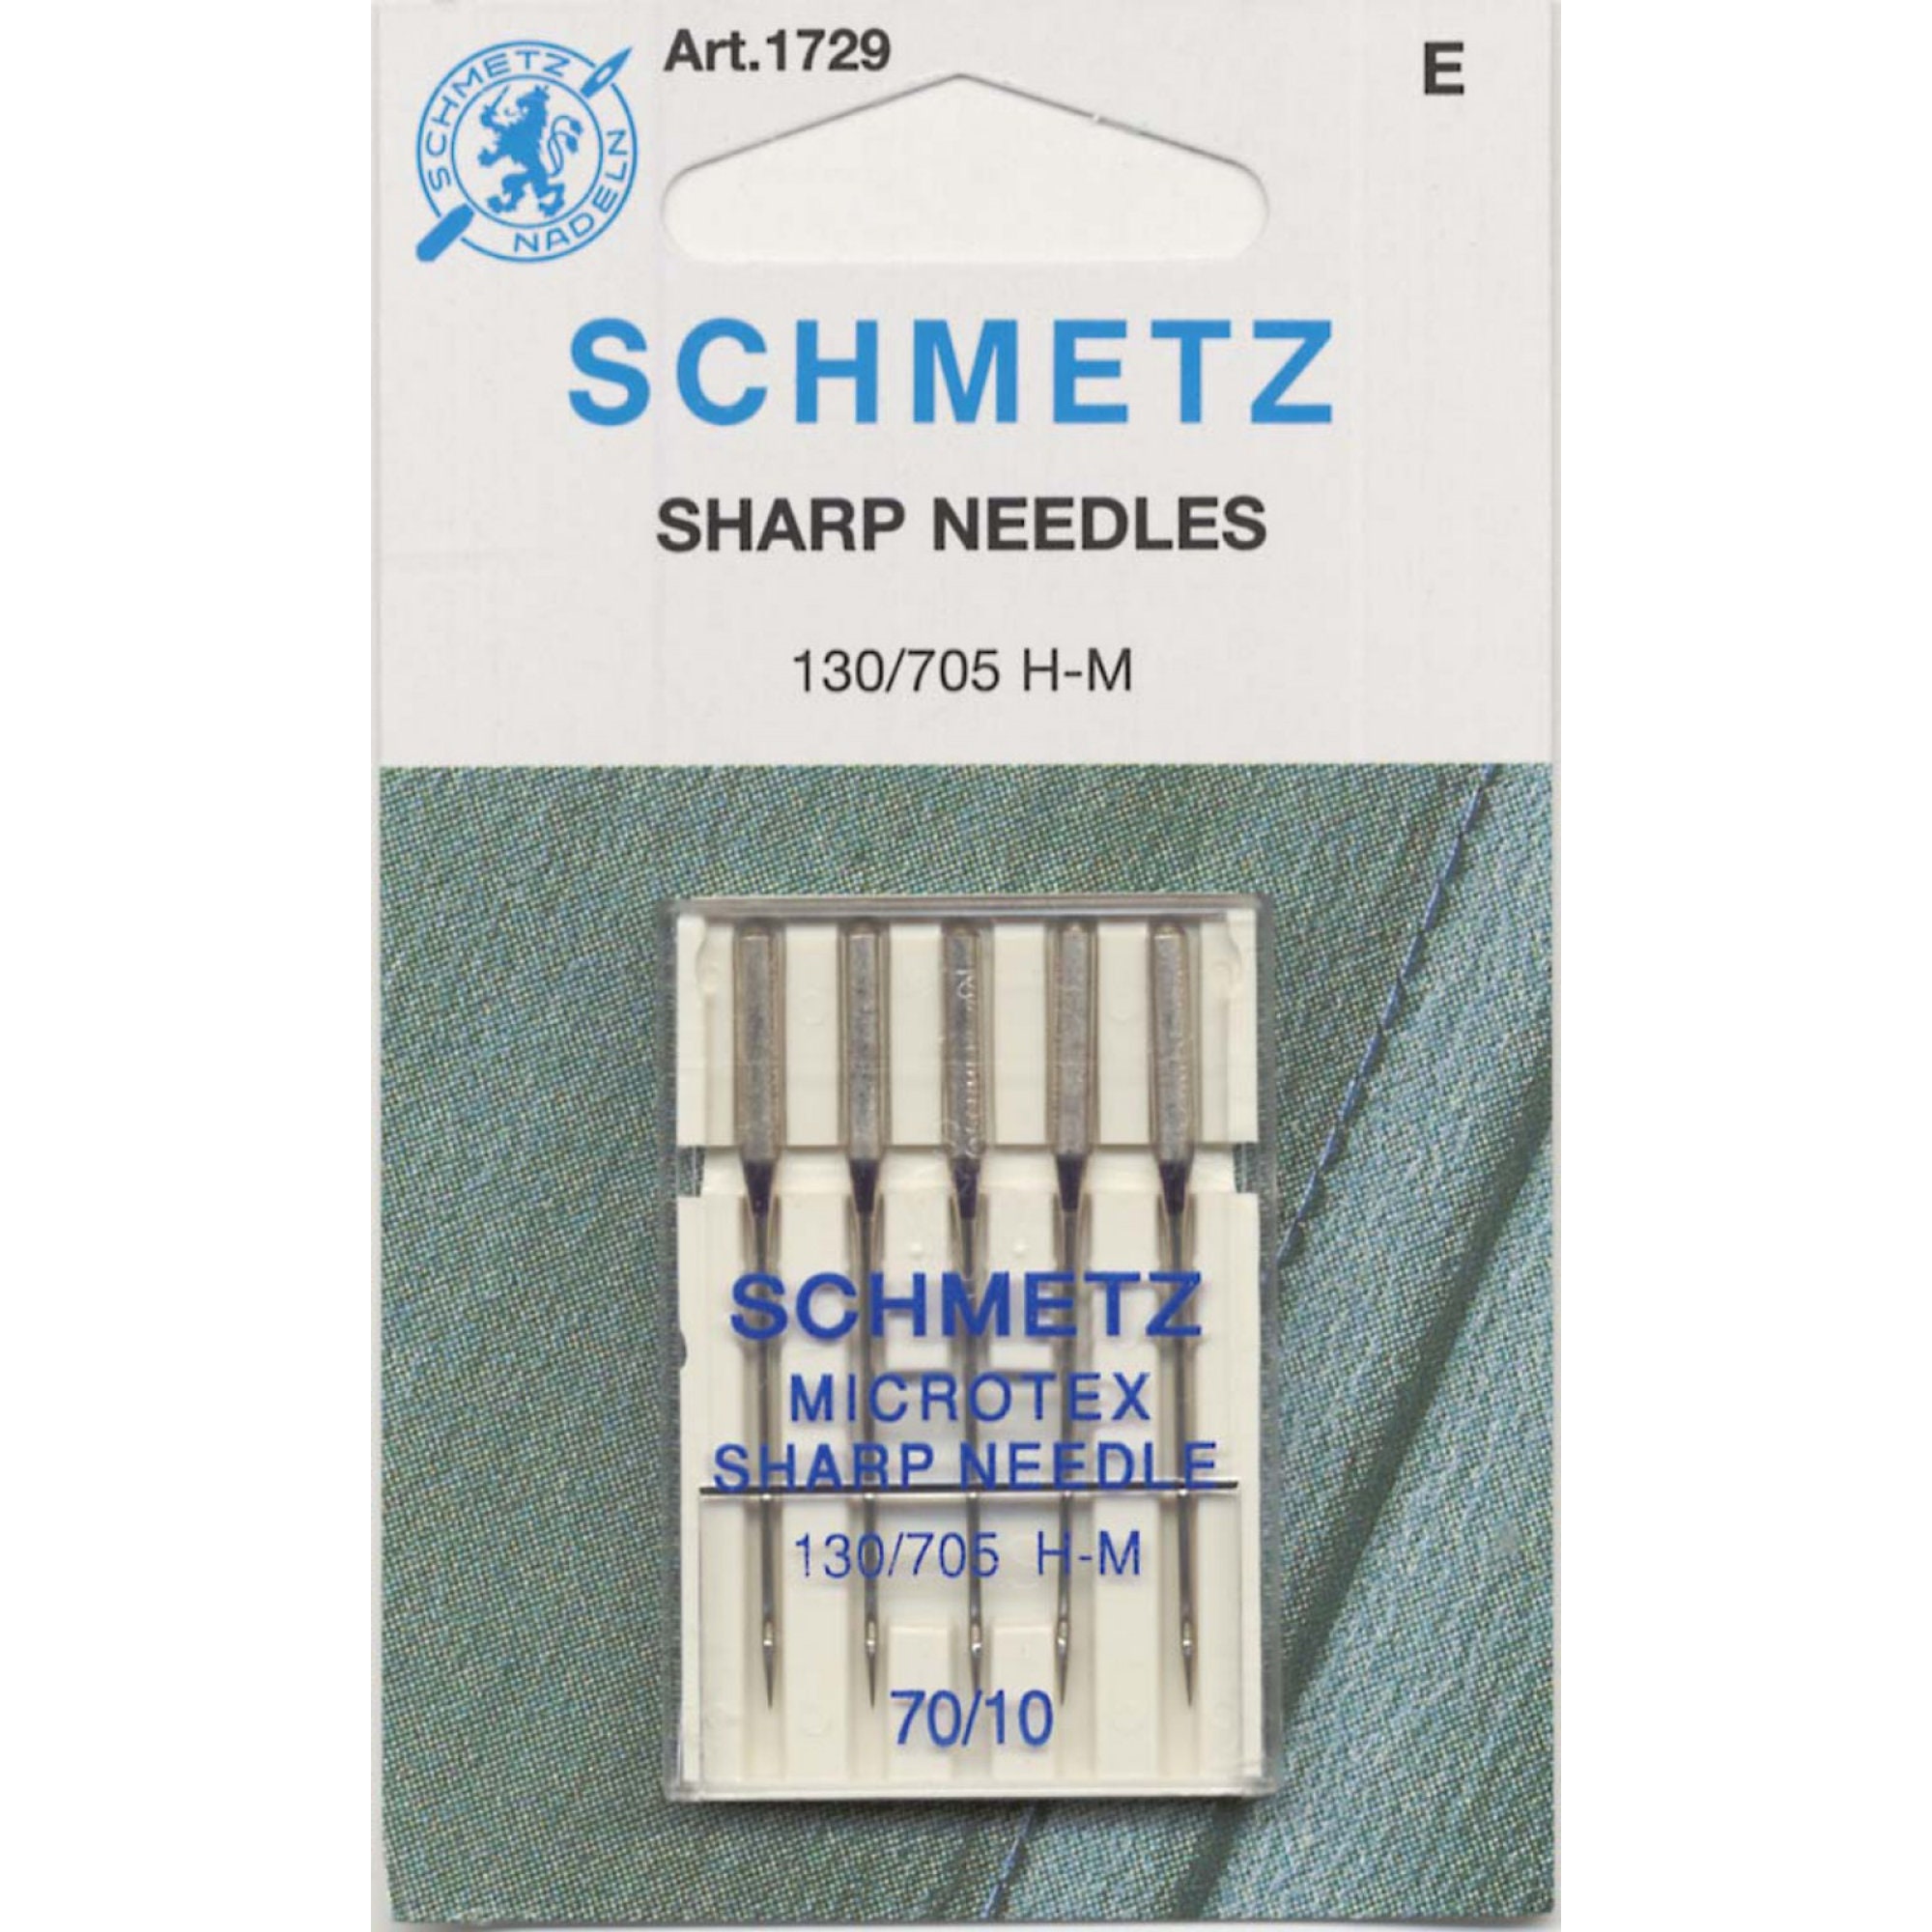 Bohin Straw Milliners Needles Size 9 or Size 10 Pack of 15 